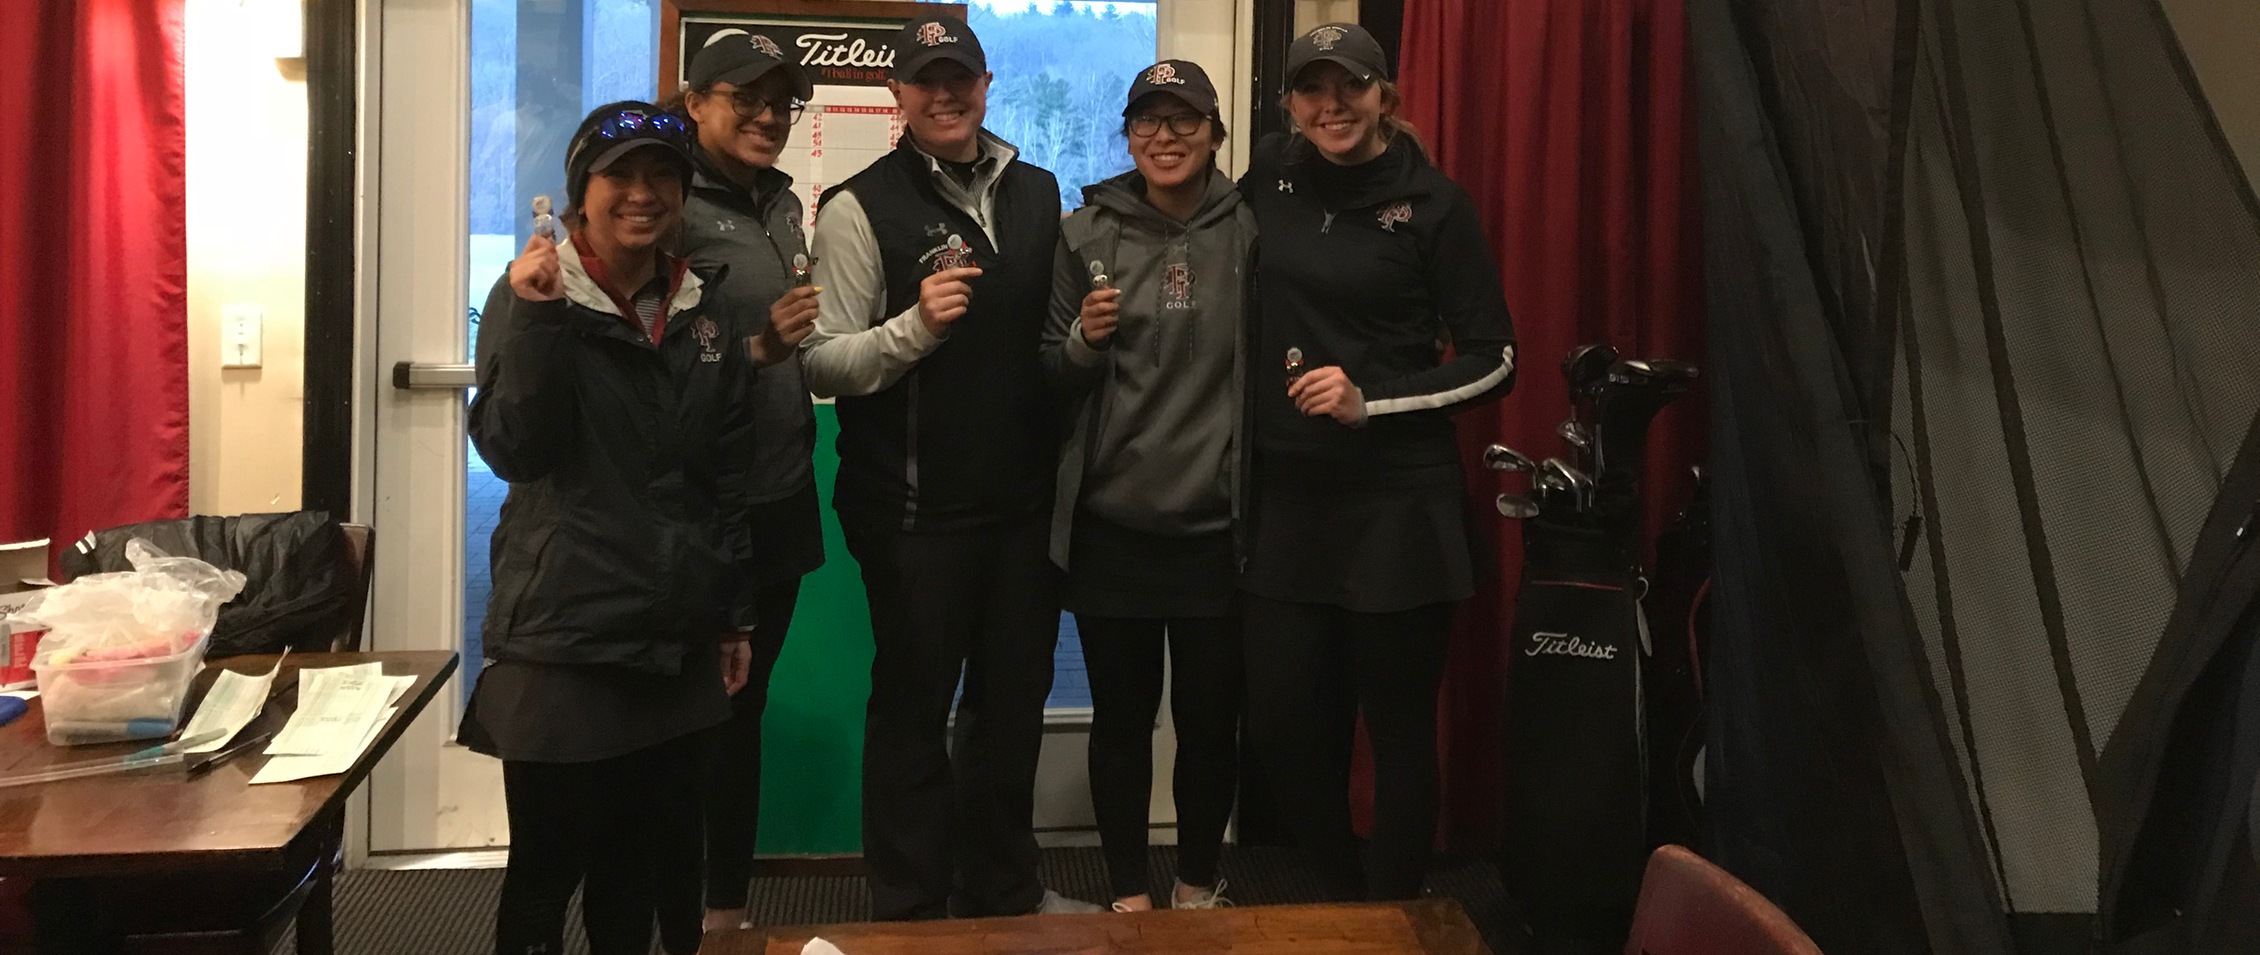 Women’s Golf Takes Home Fifth First Place Team Finish at Assumption